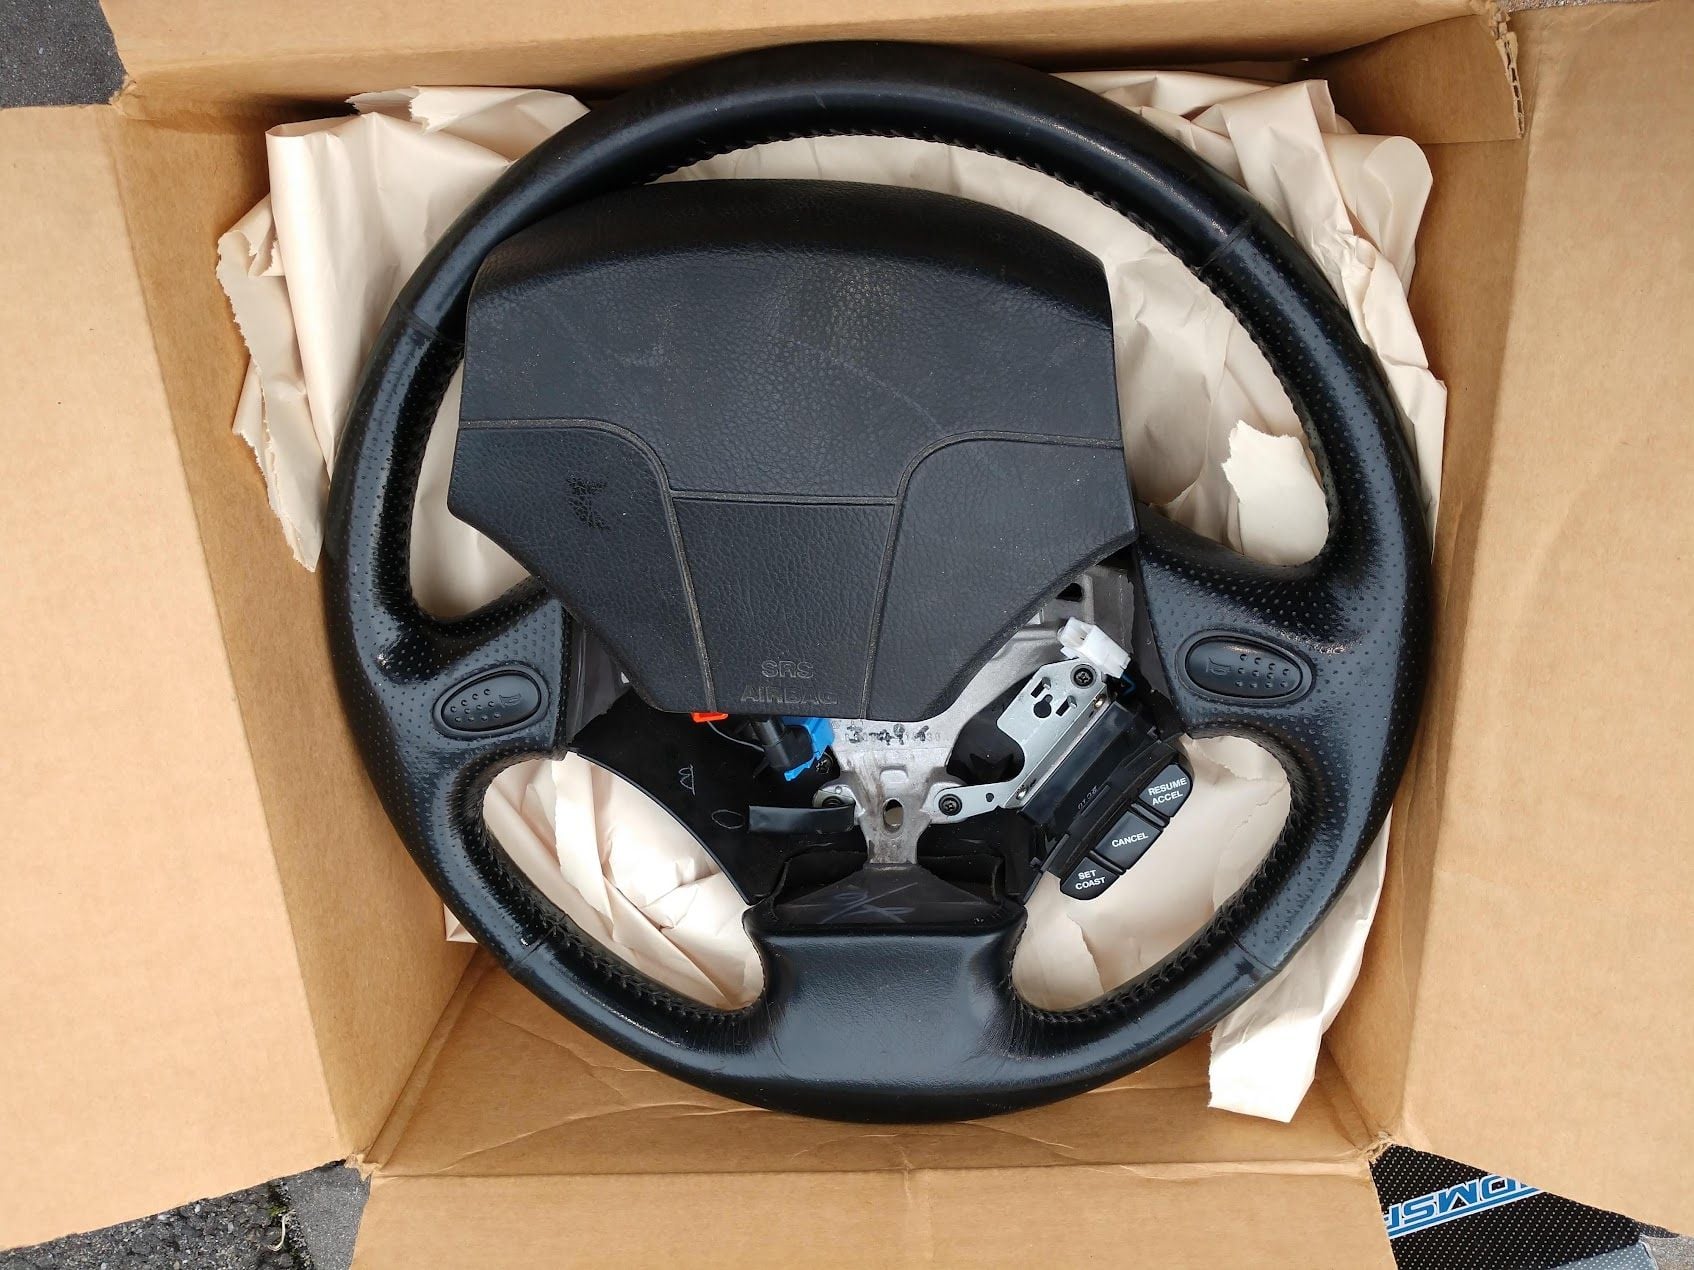 Steering/Suspension - 93 Stock Steering Wheel, KYB GR-2 Shocks, Wheel Adapters, Aluminum Lug Nuts, Shifter - Used - 1993 to 1995 Mazda RX-7 - Clifton, NJ 07012, United States